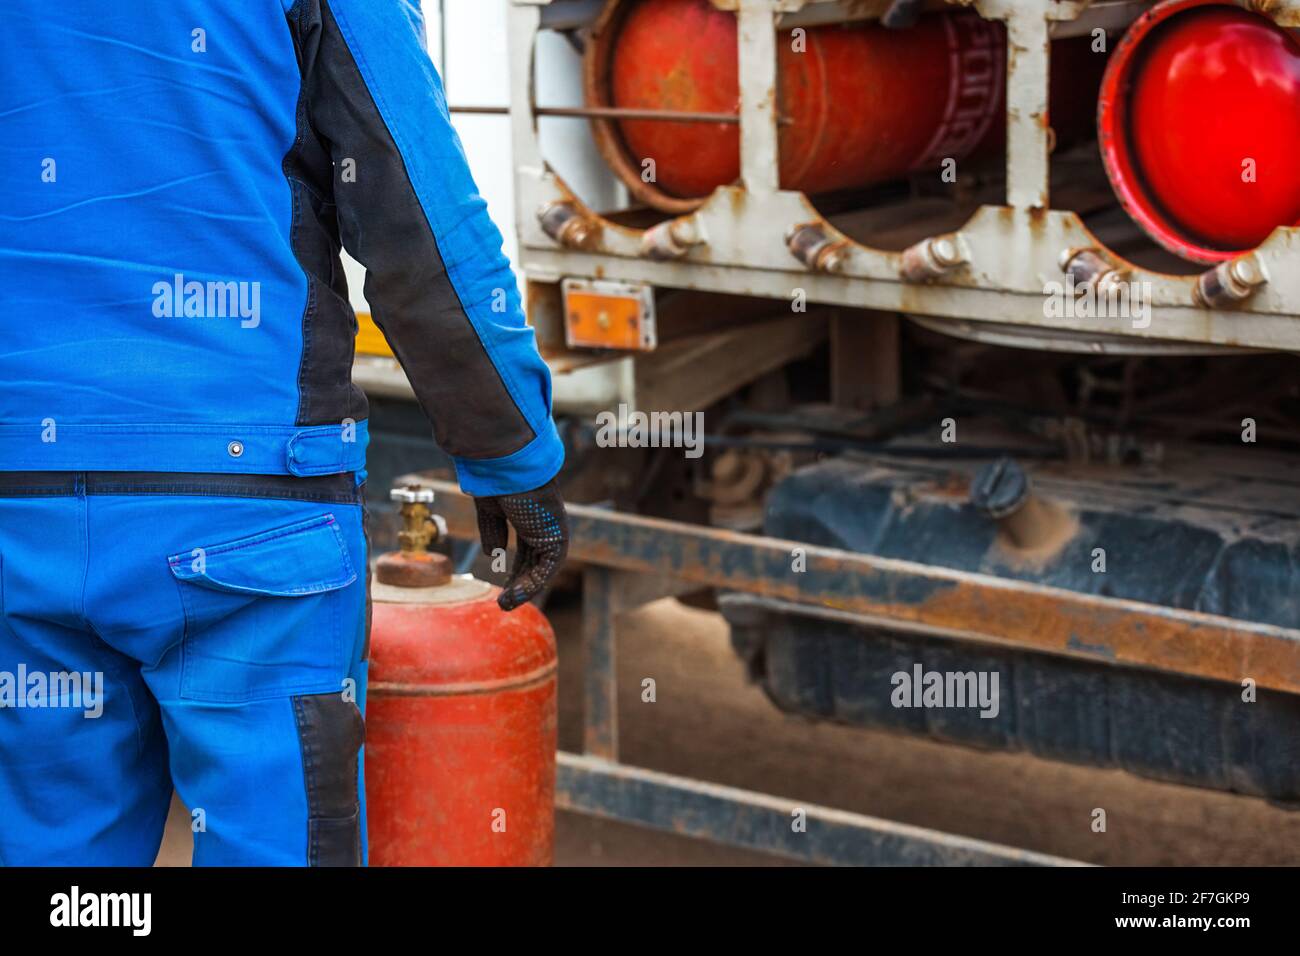 Male industrial worker puts a gas cylinder into a gas machine. Equipment for the safe transportation of propane gas bottles. Stock Photo